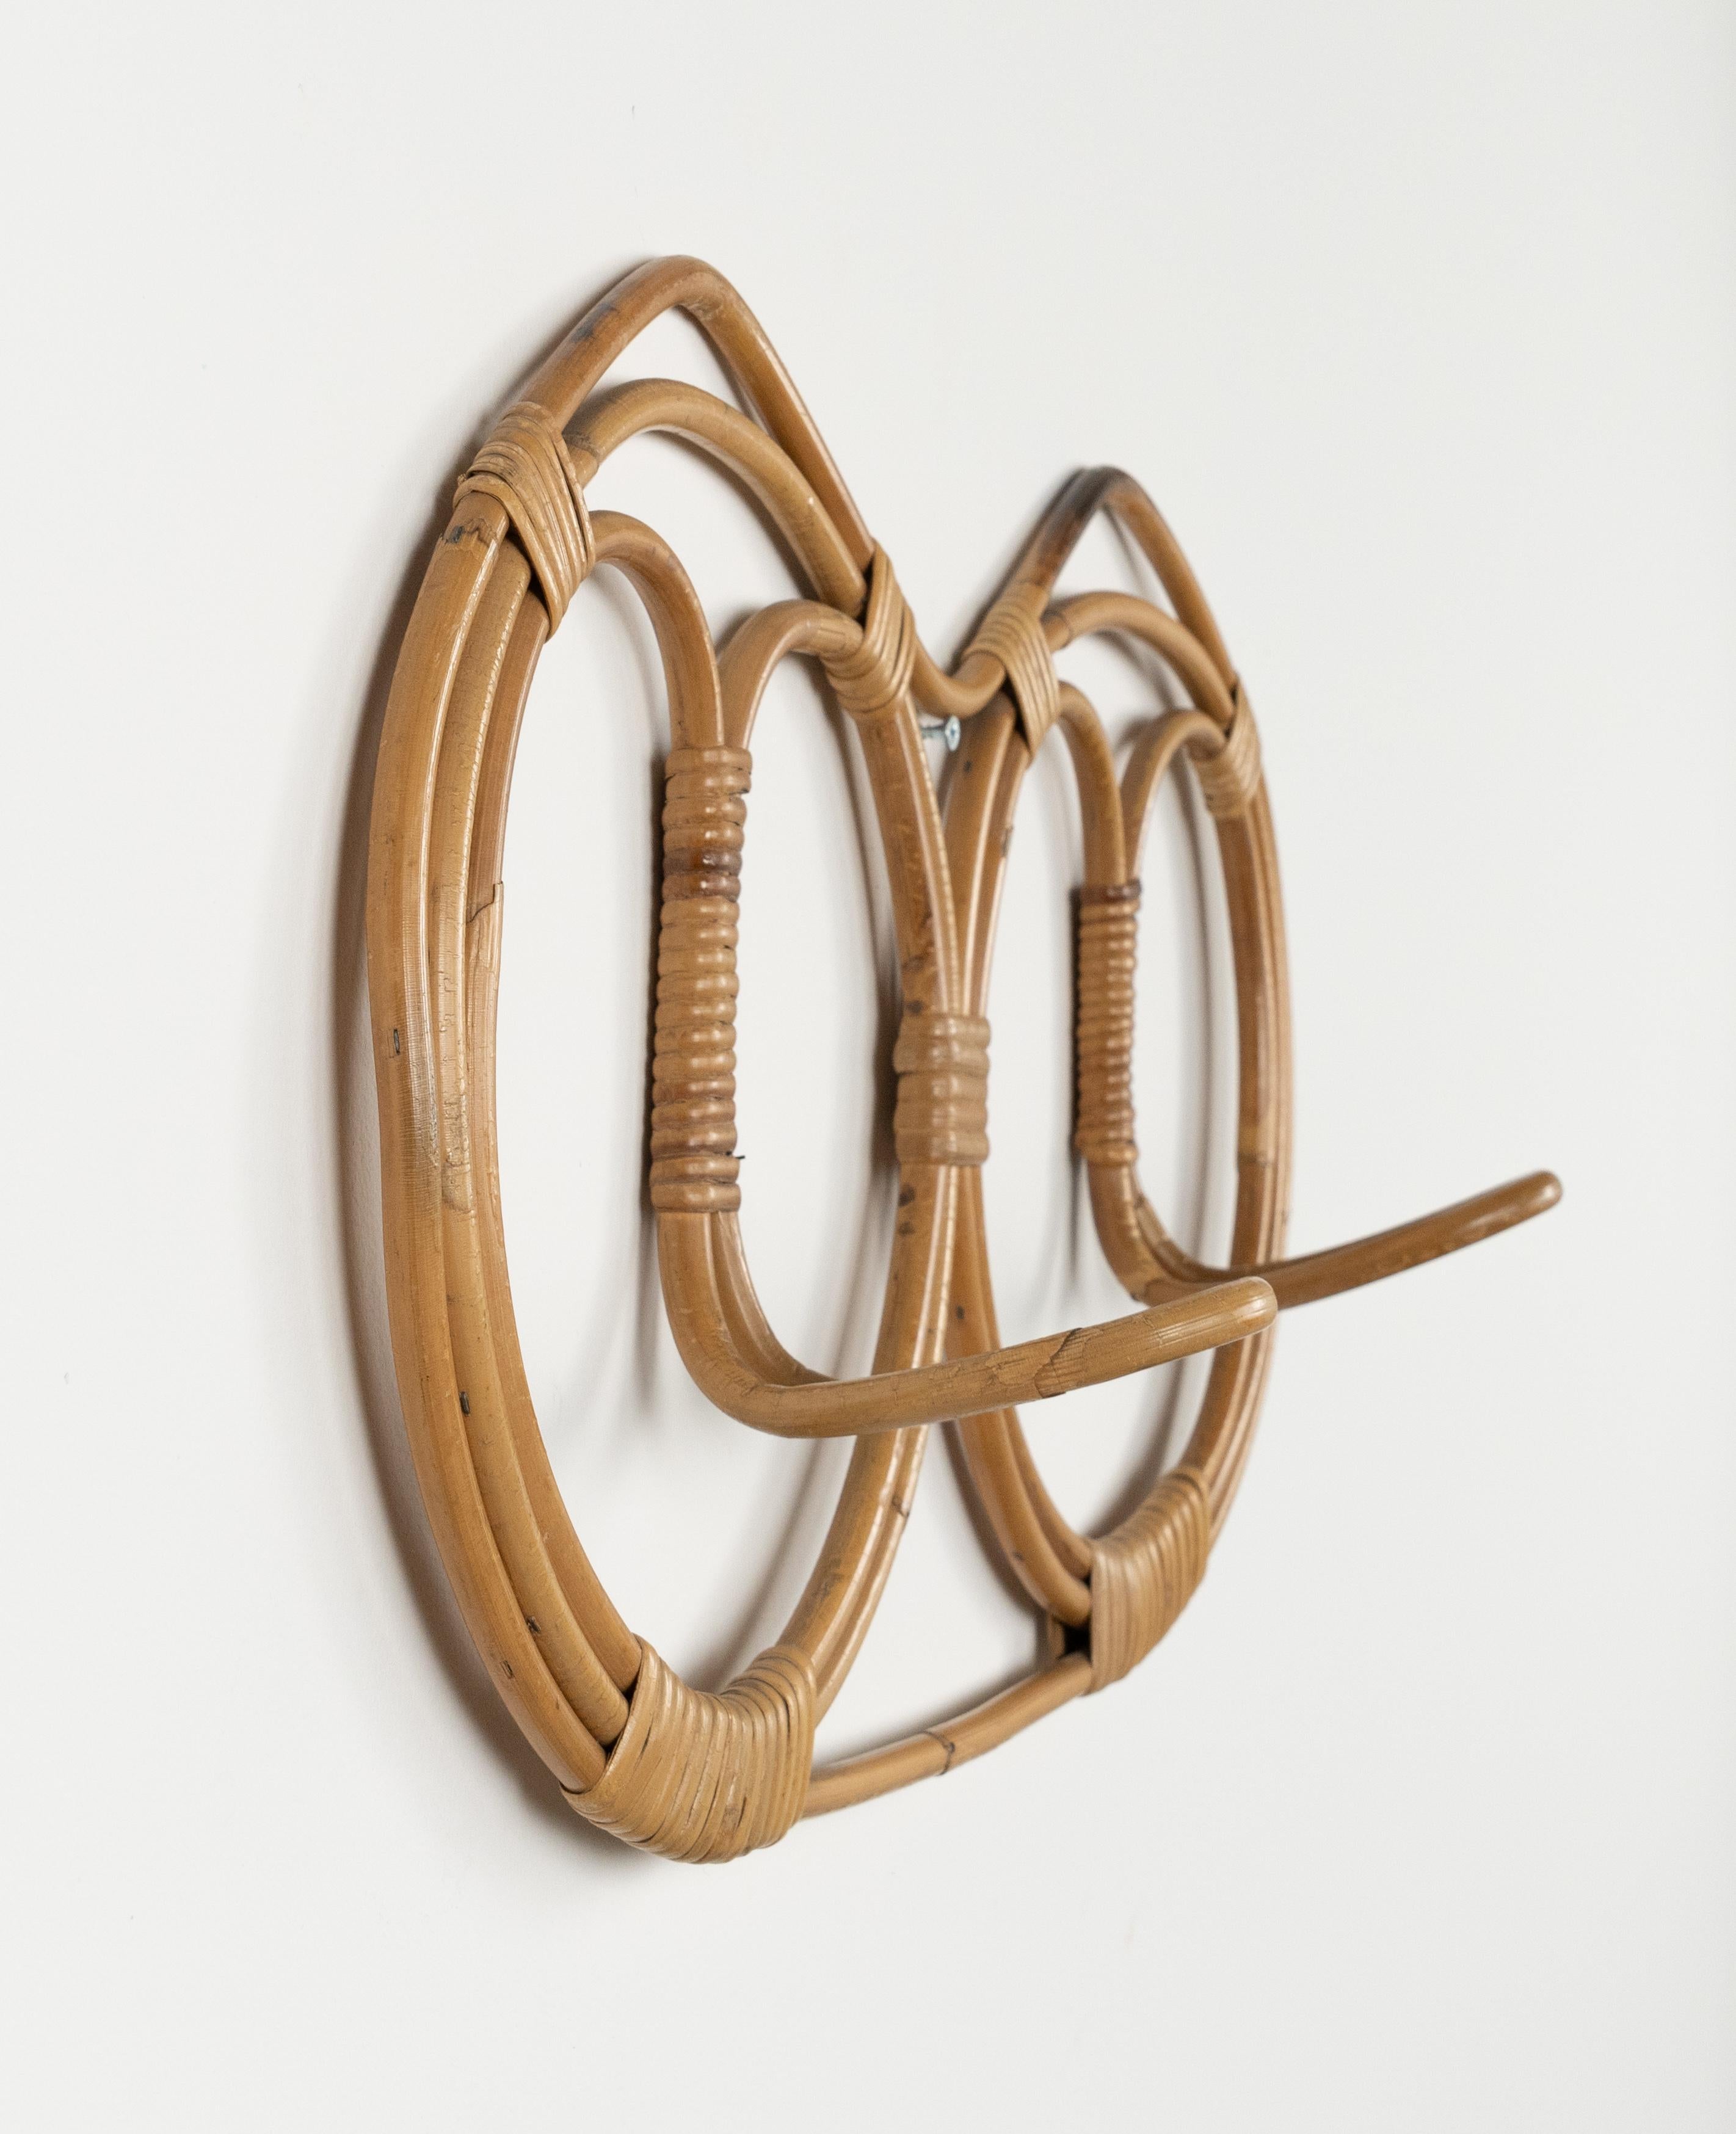 Mid-Century Modern Midcentury Wall Coat Rack in Bamboo and Rattan by Franco Albini, Italy 1960s